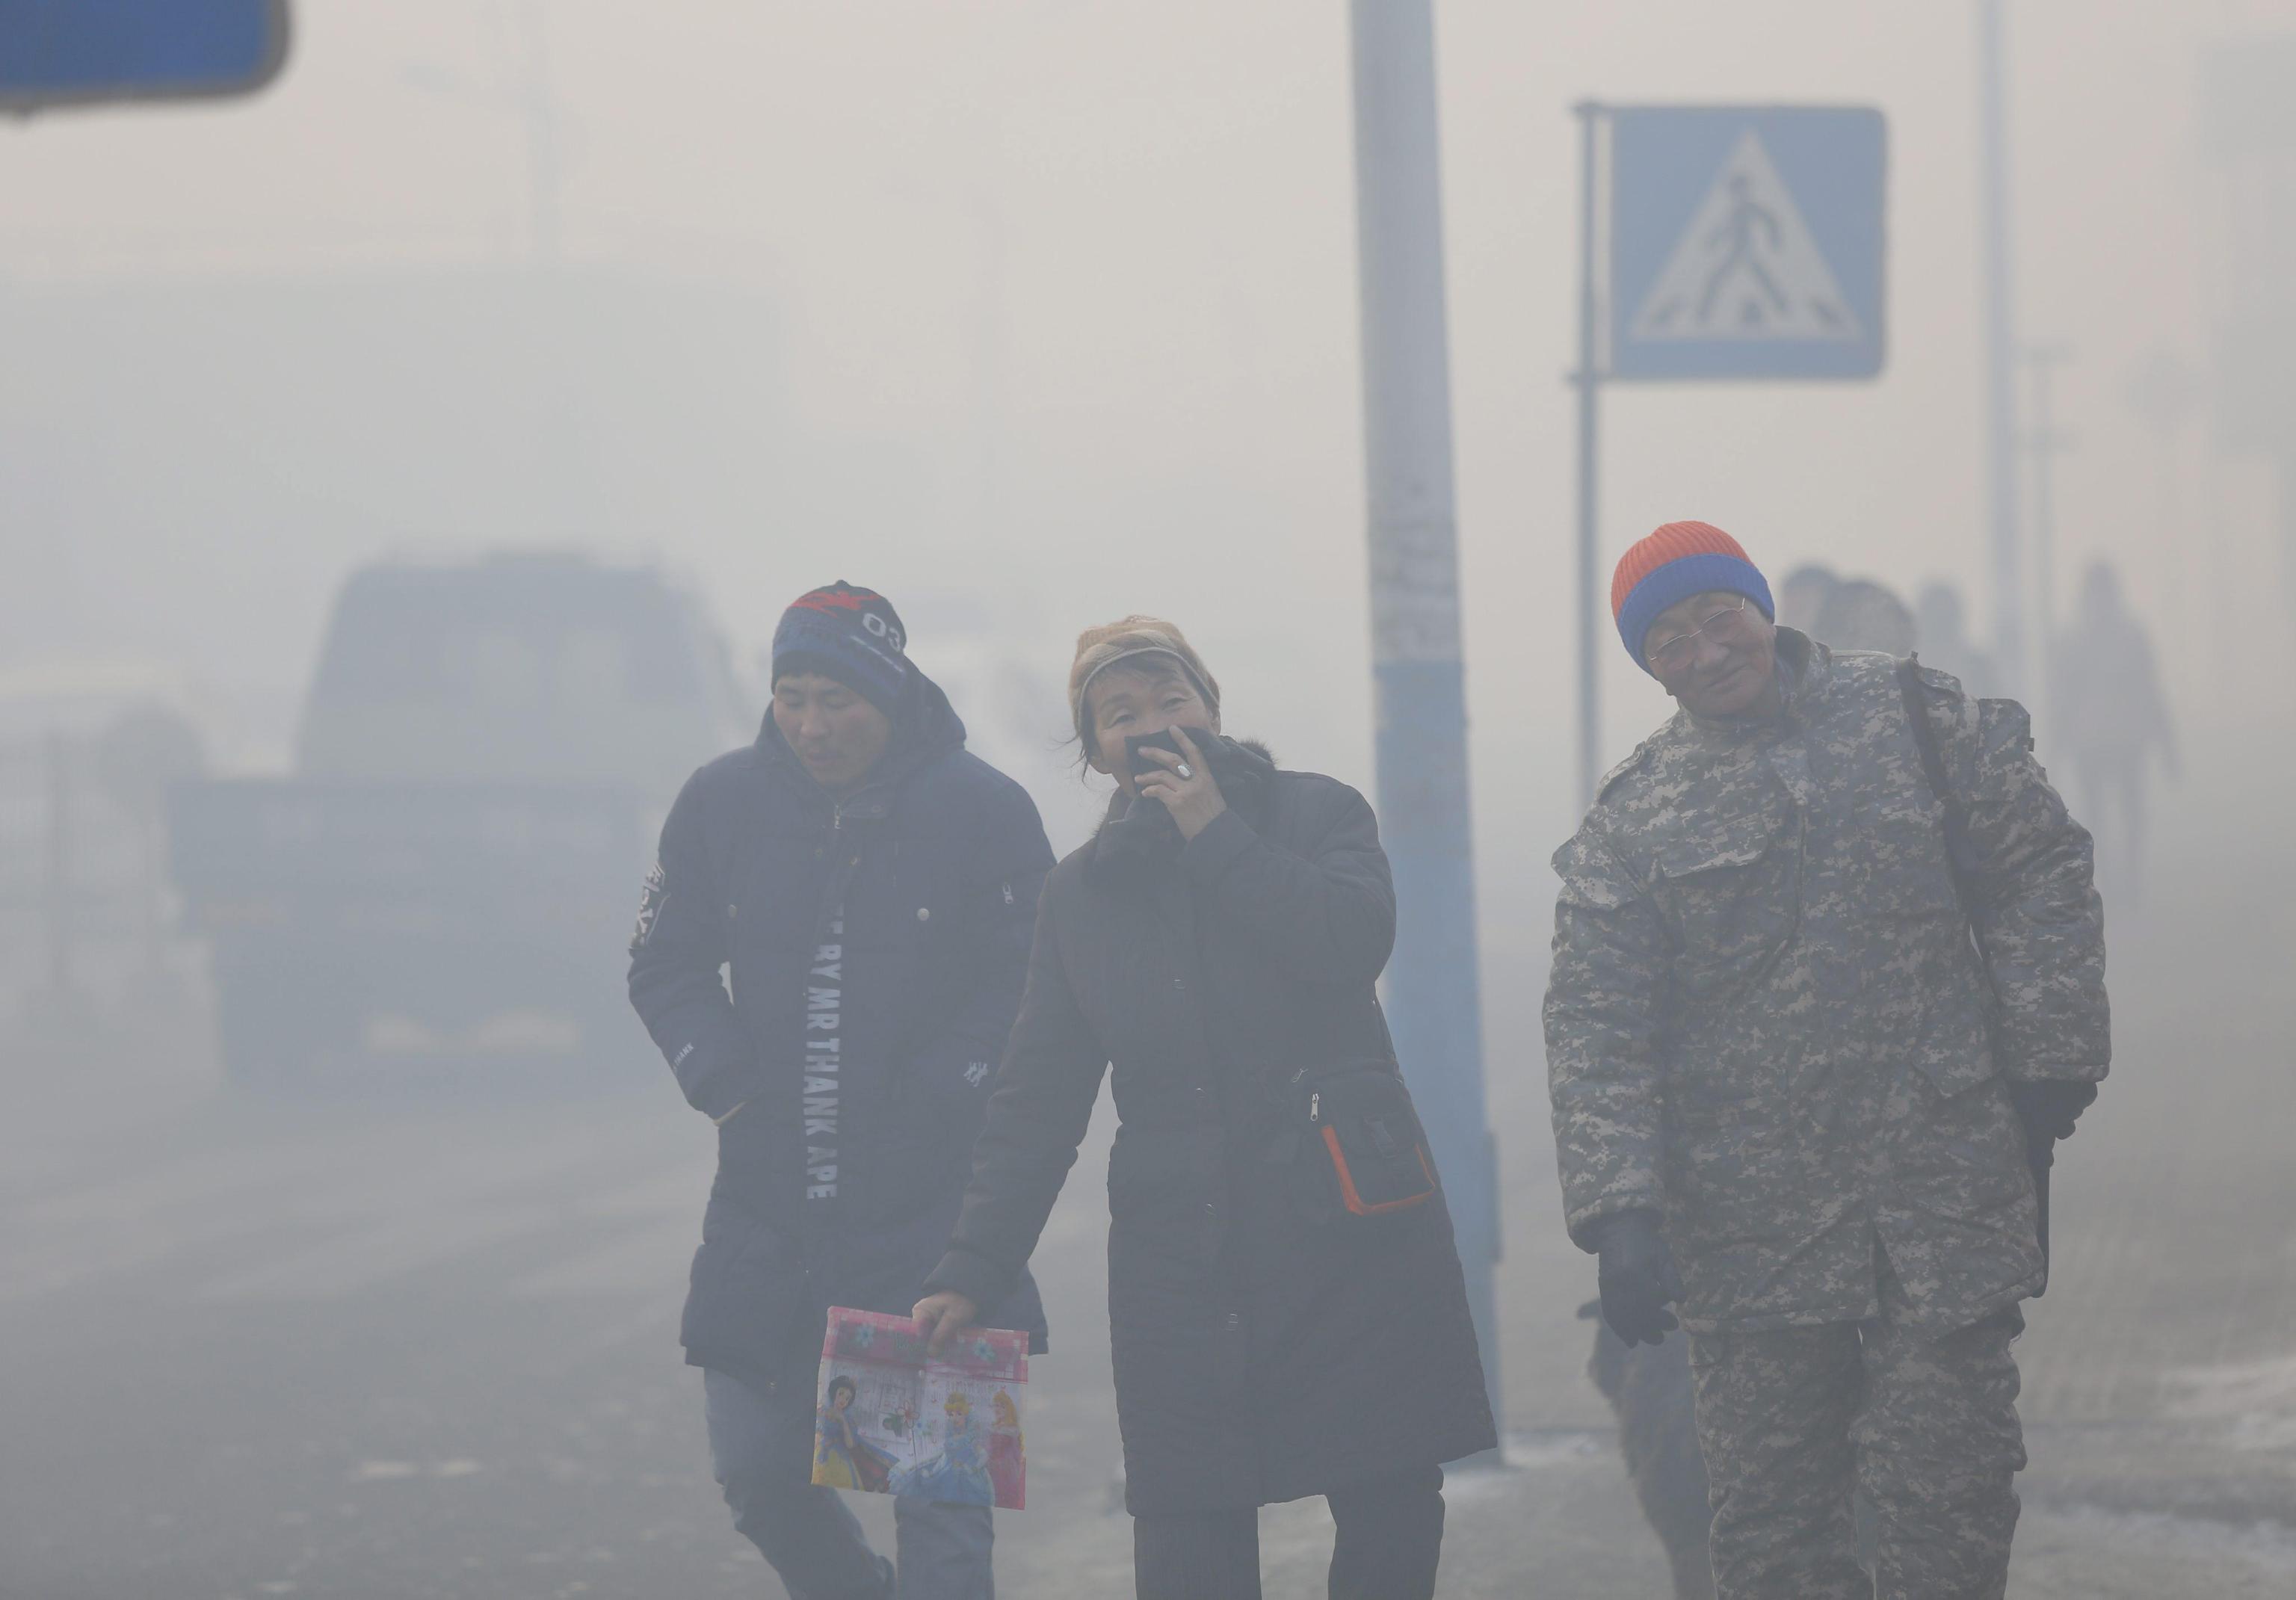 epa05712041 Mongolians wearing masks walk along a road shrouded in haze in the capital city of Ulaanbaatar, Mongolia, 12 January 2017. Mongolian President Tsakhiagiin Elbegdorj said on 11 January 2017, that air pollution in Ulaanbaatar has reached disaster levels and the city is declared to be in a state of disaster where measures like evacuations are recommended for some areas, according to local media.  EPA/DAVAANYAM DELGERJARGAL